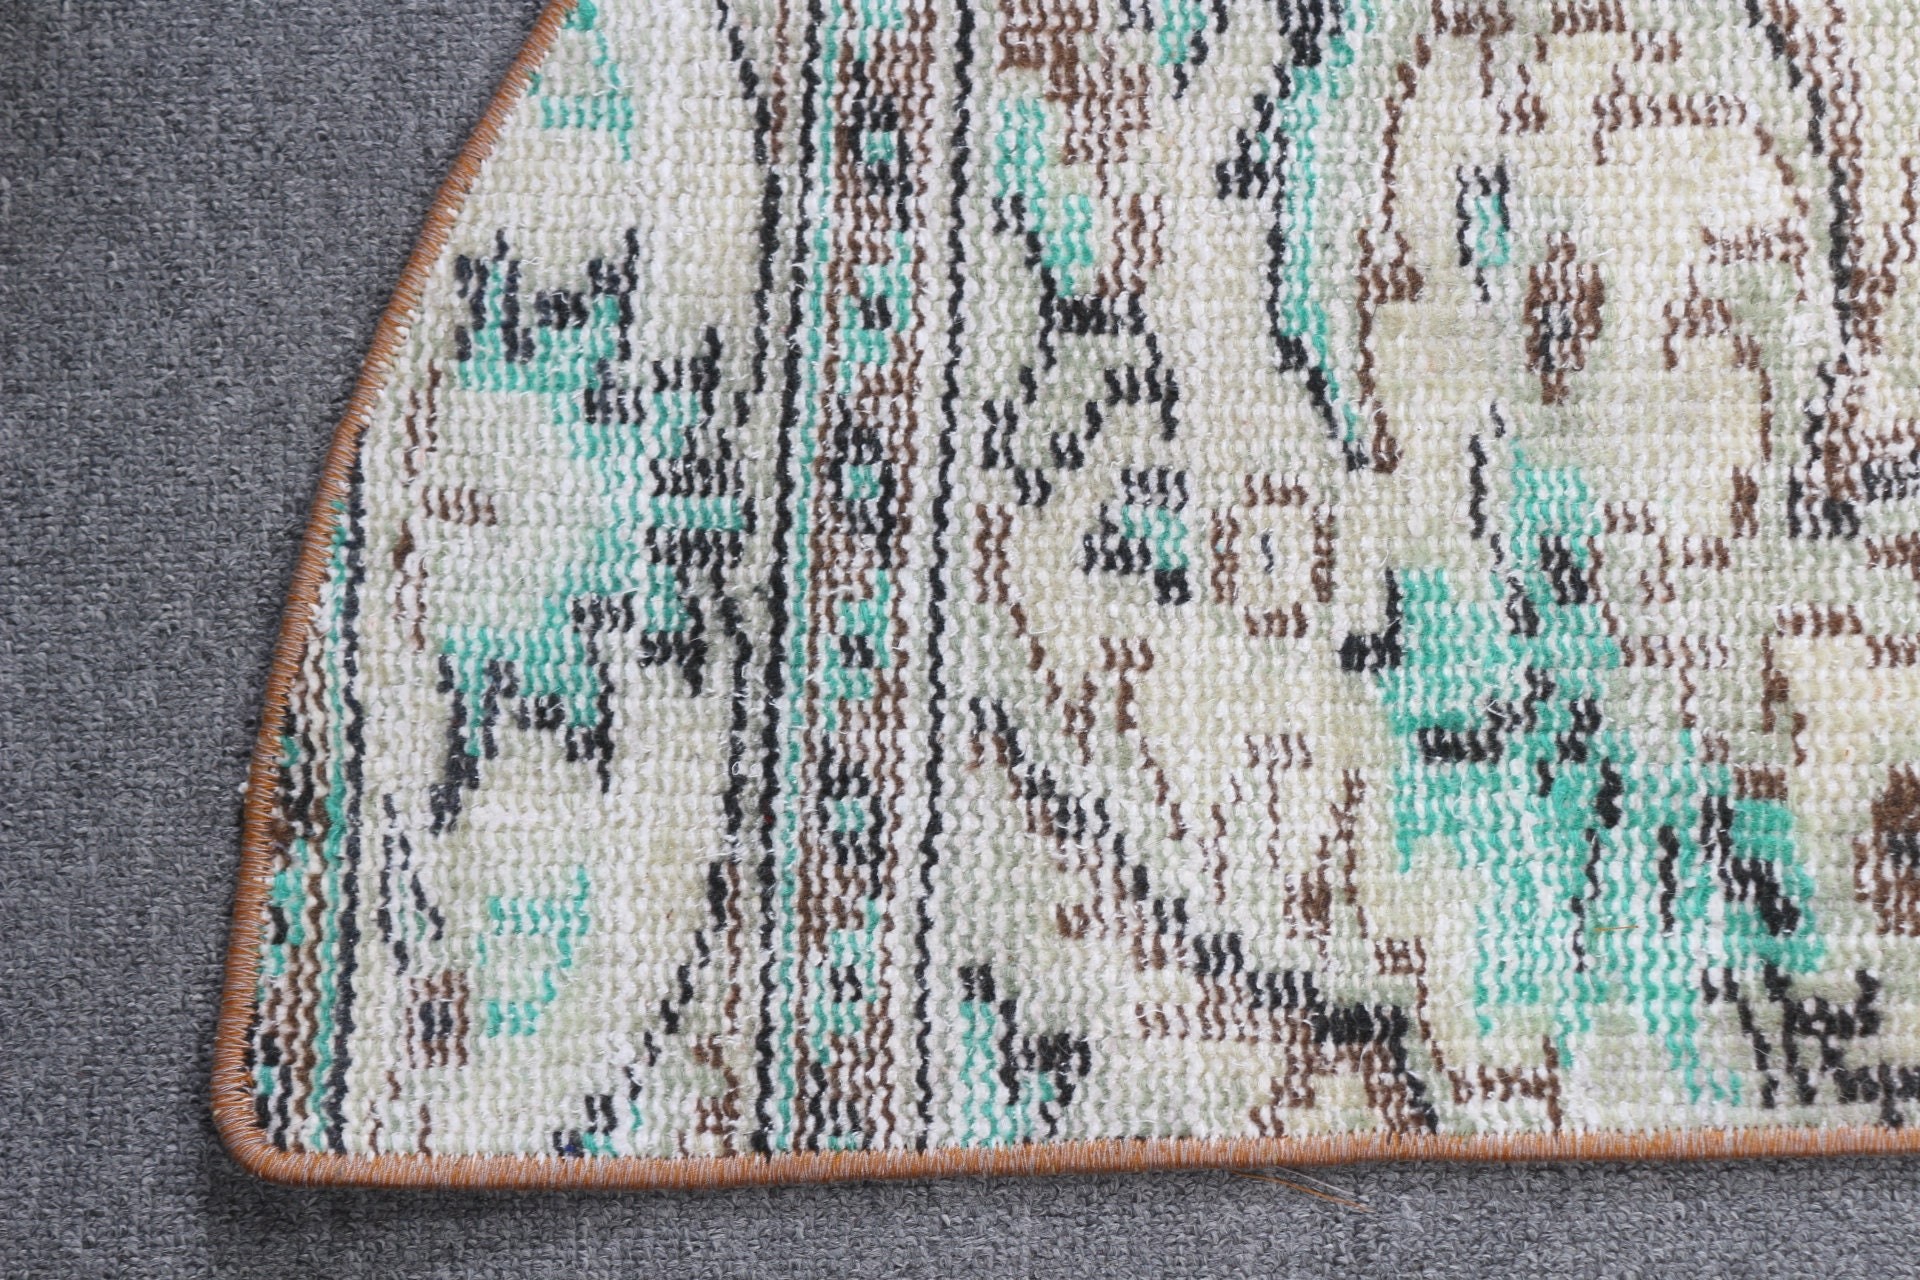 Wall Hanging Rugs, Turkish Rugs, 2.5x1.5 ft Small Rug, Vintage Rugs, Green Antique Rug, Cute Rugs, Kitchen Rug, Anatolian Rug